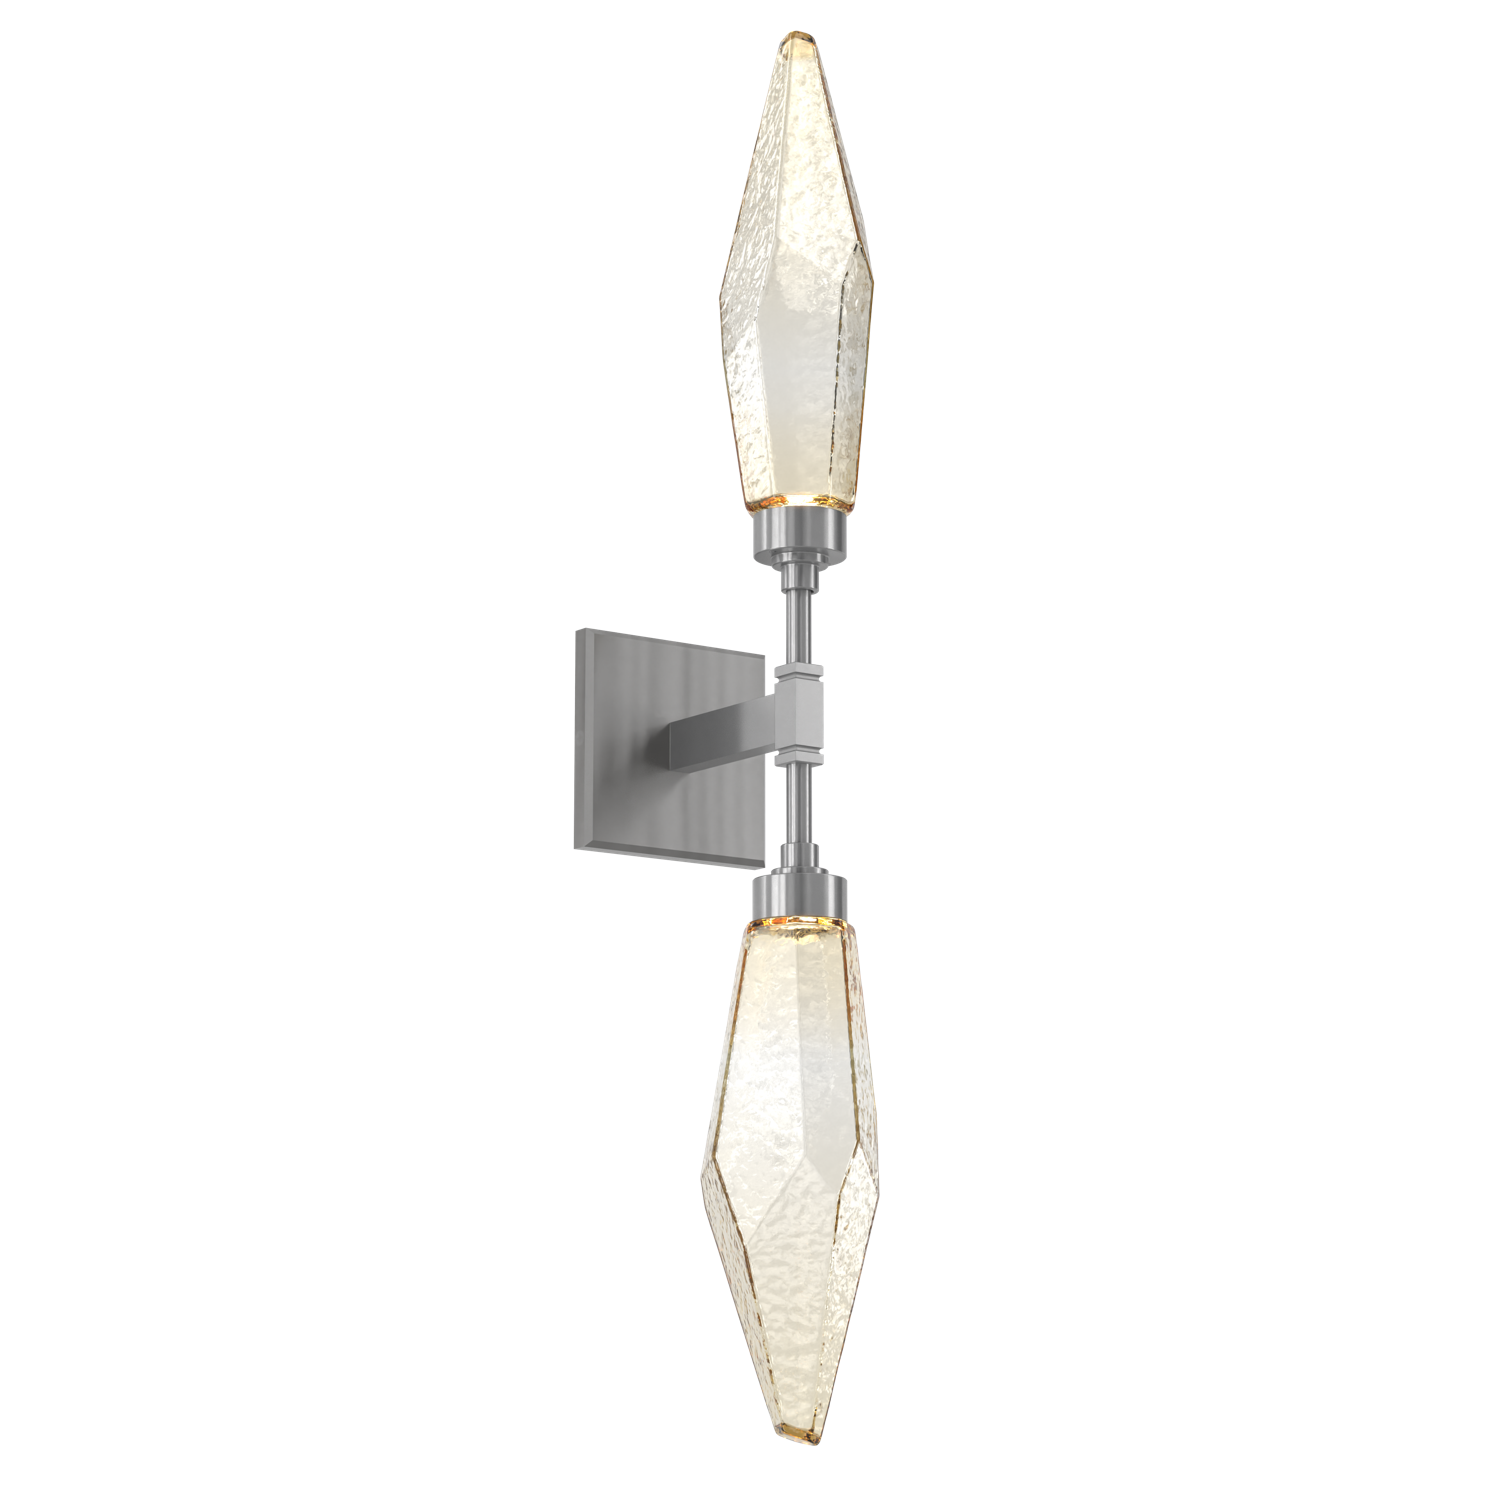 IDB0050-02-GM-CA-Hammerton-Studio-Rock-Crystal-wall-sconce-with-gunmetal-finish-and-chilled-amber-blown-glass-shades-and-LED-lamping